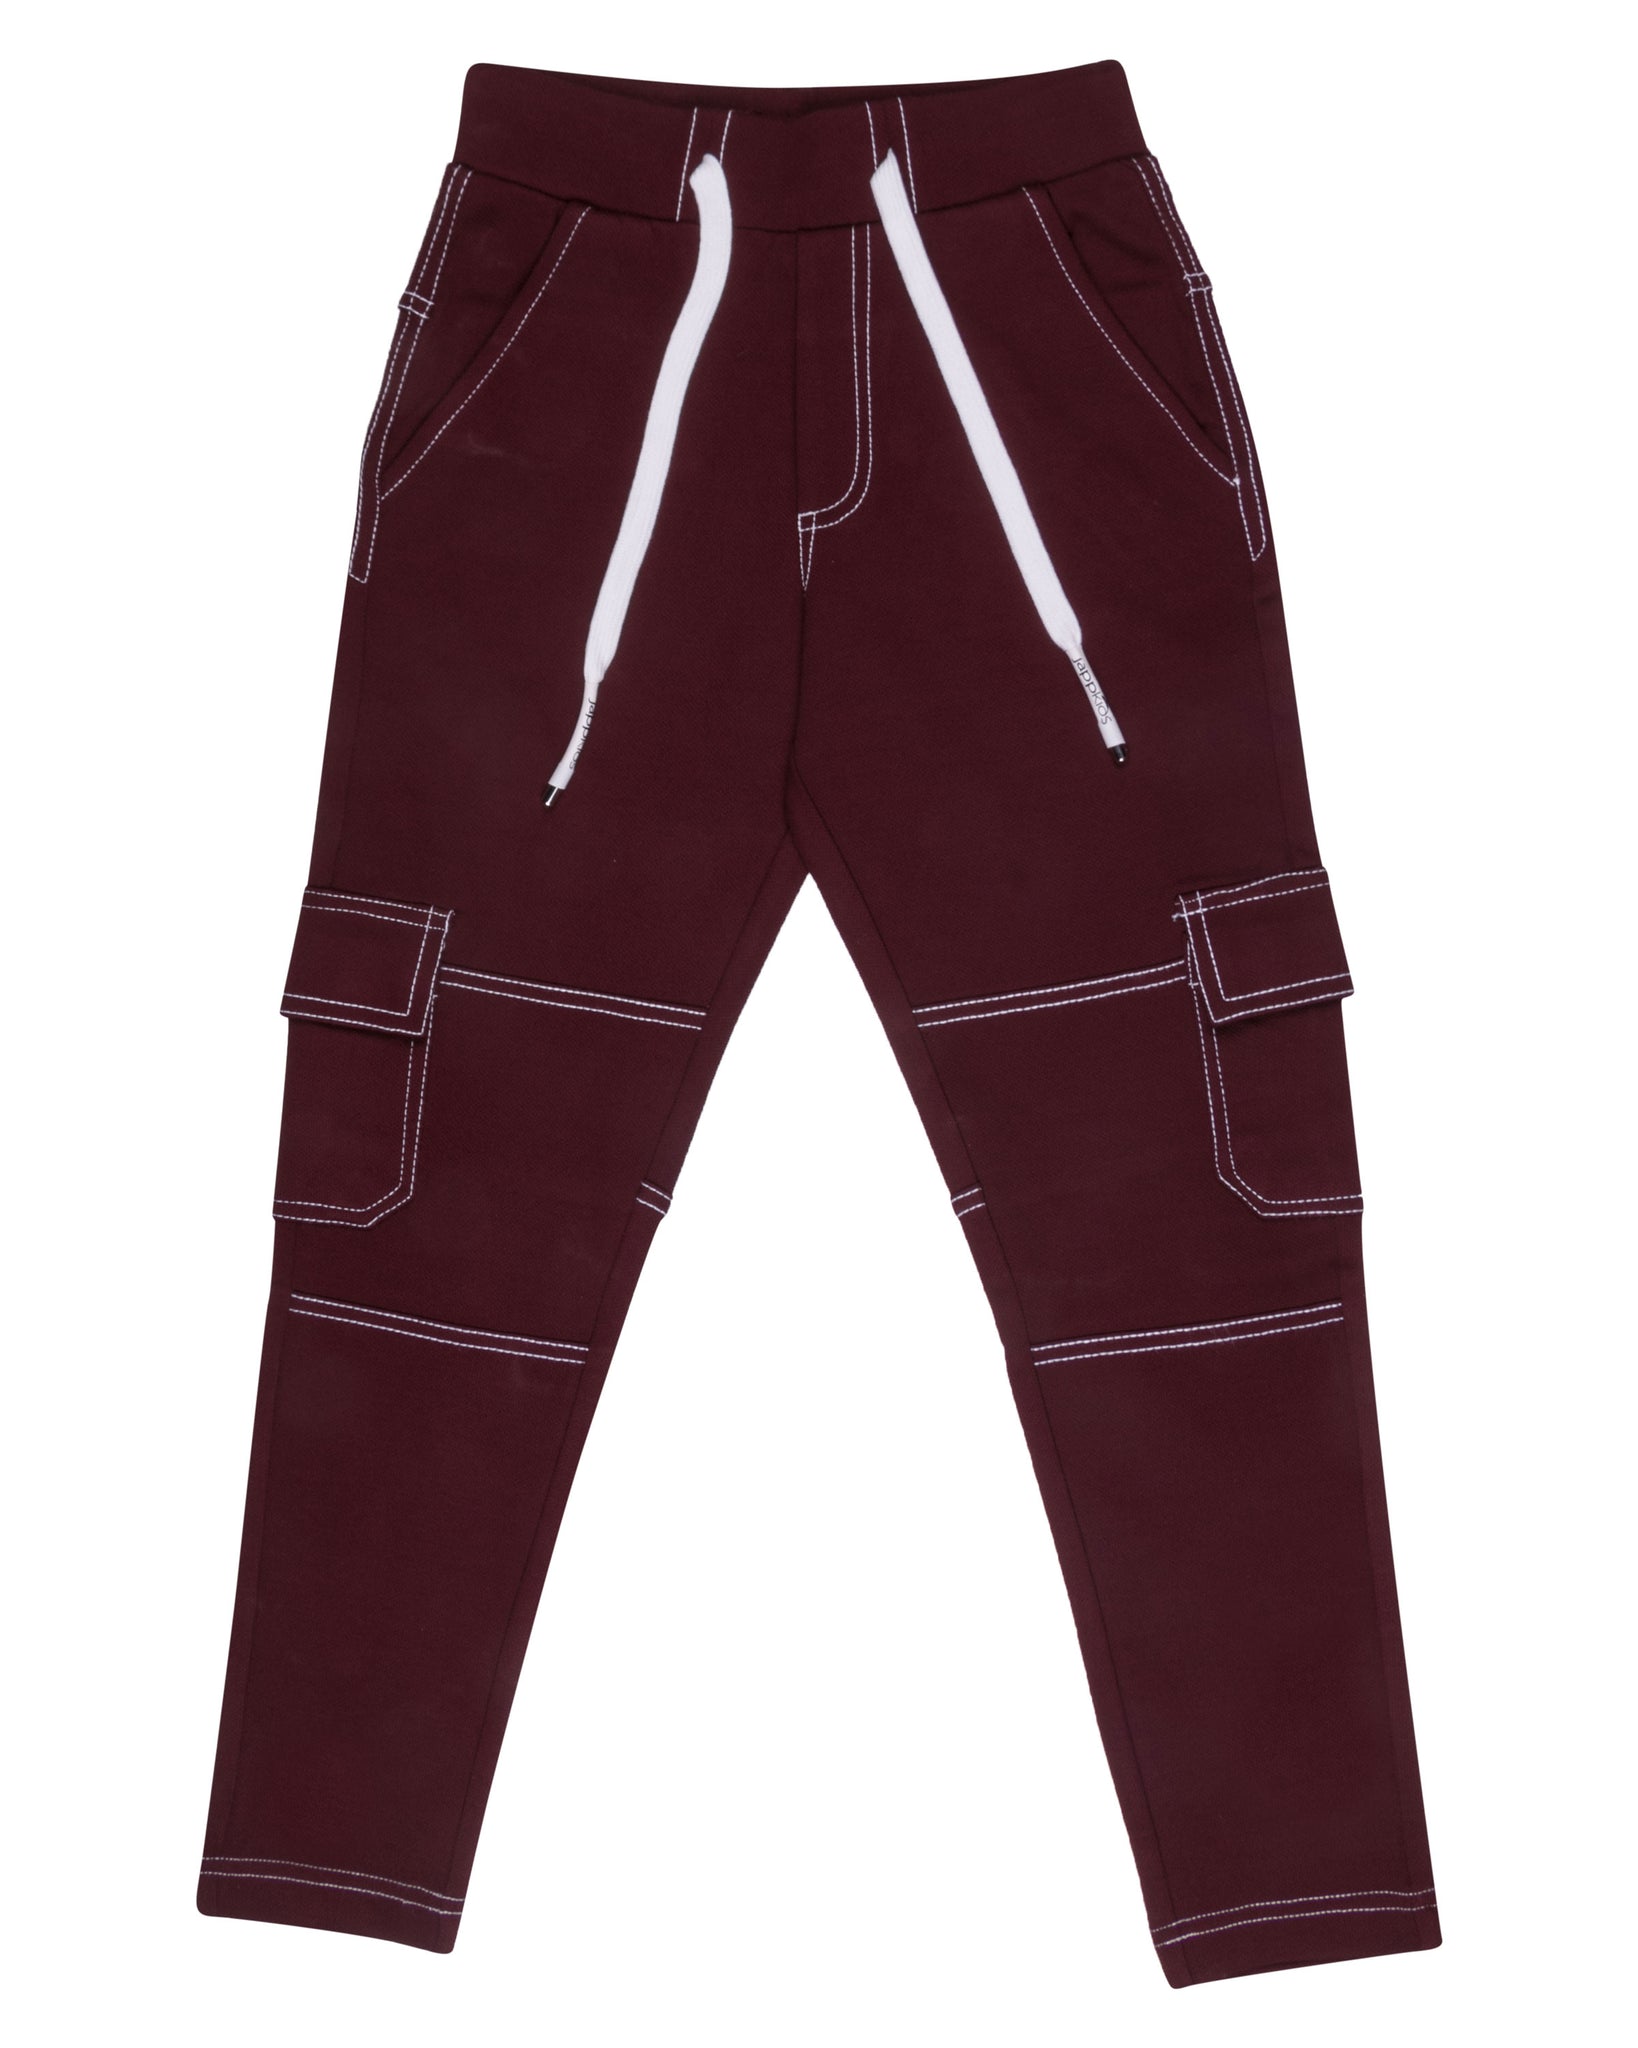 Boys Palm Tree Track Pants - Buy Boys Palm Tree Track Pants online in India